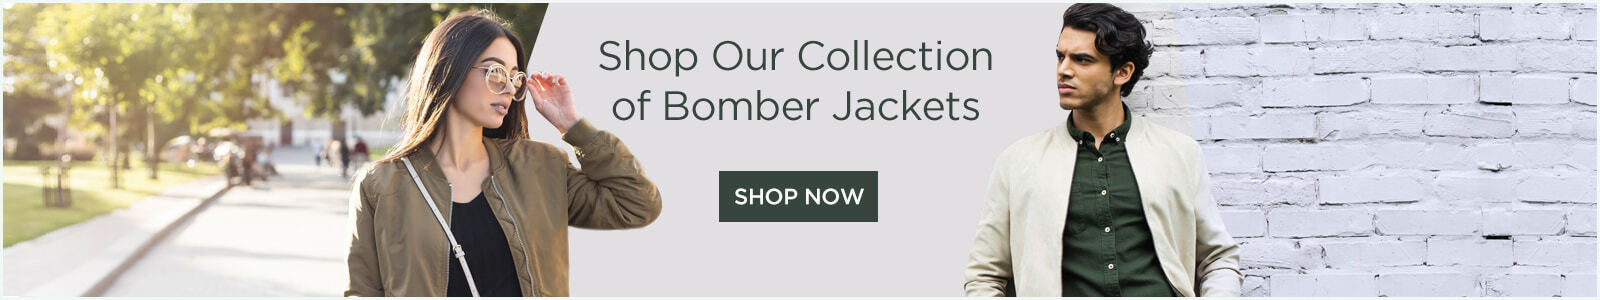 Shop our collection of Bomber Jackets Shop Now 